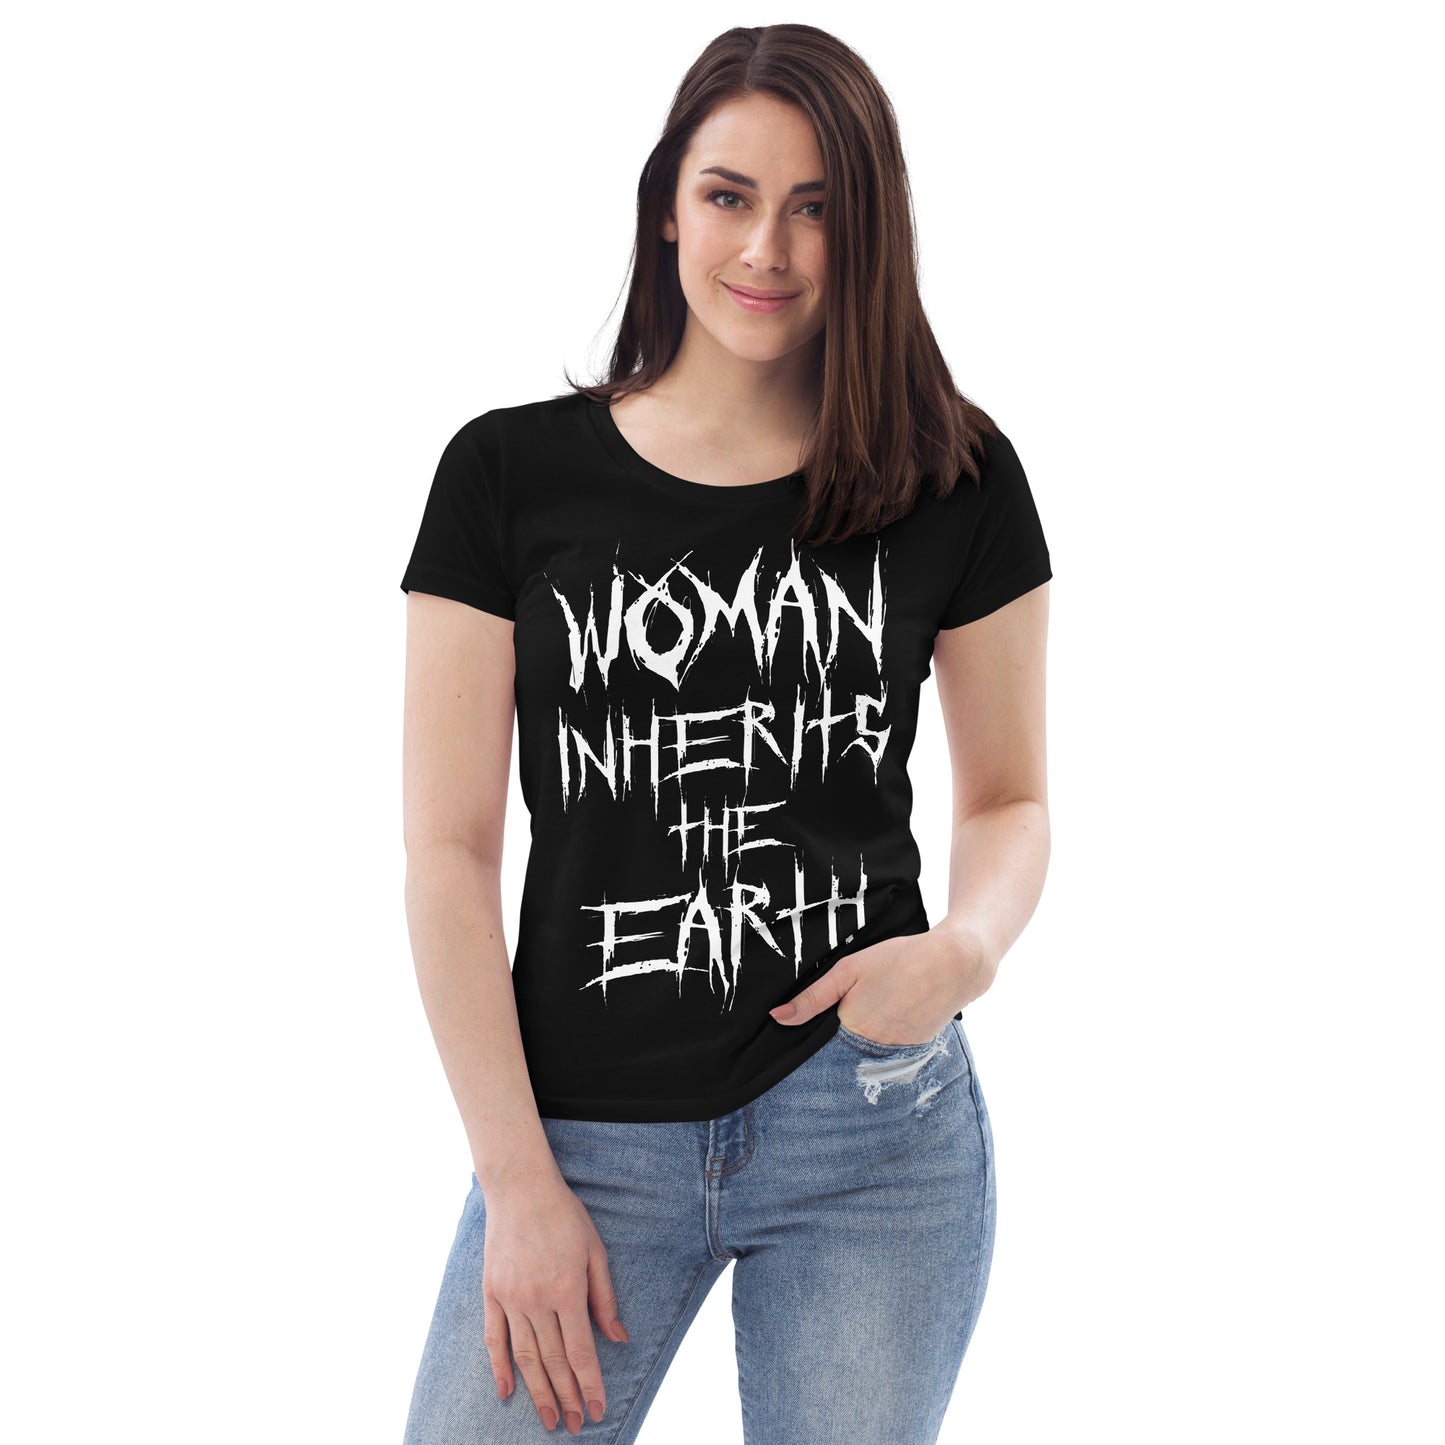 Woman Inherits The Earth, Jurassic Park Double-Sided Ladies Fitted Eco Tee